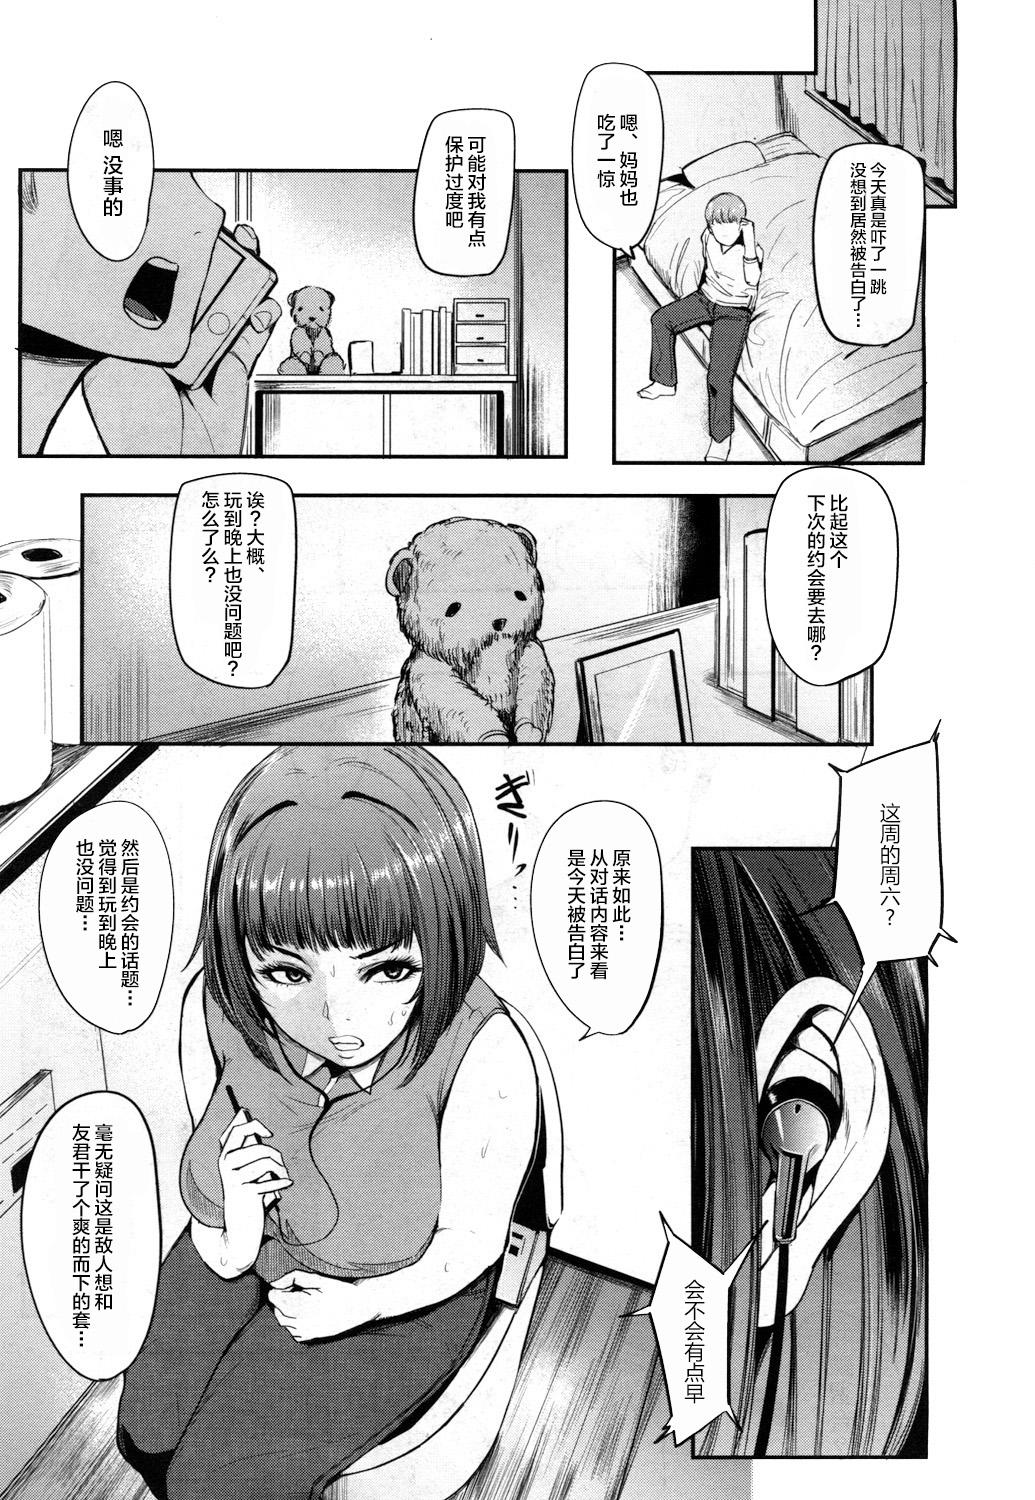 Doctor Mamadoll | 妈妈人偶 Show - Page 7